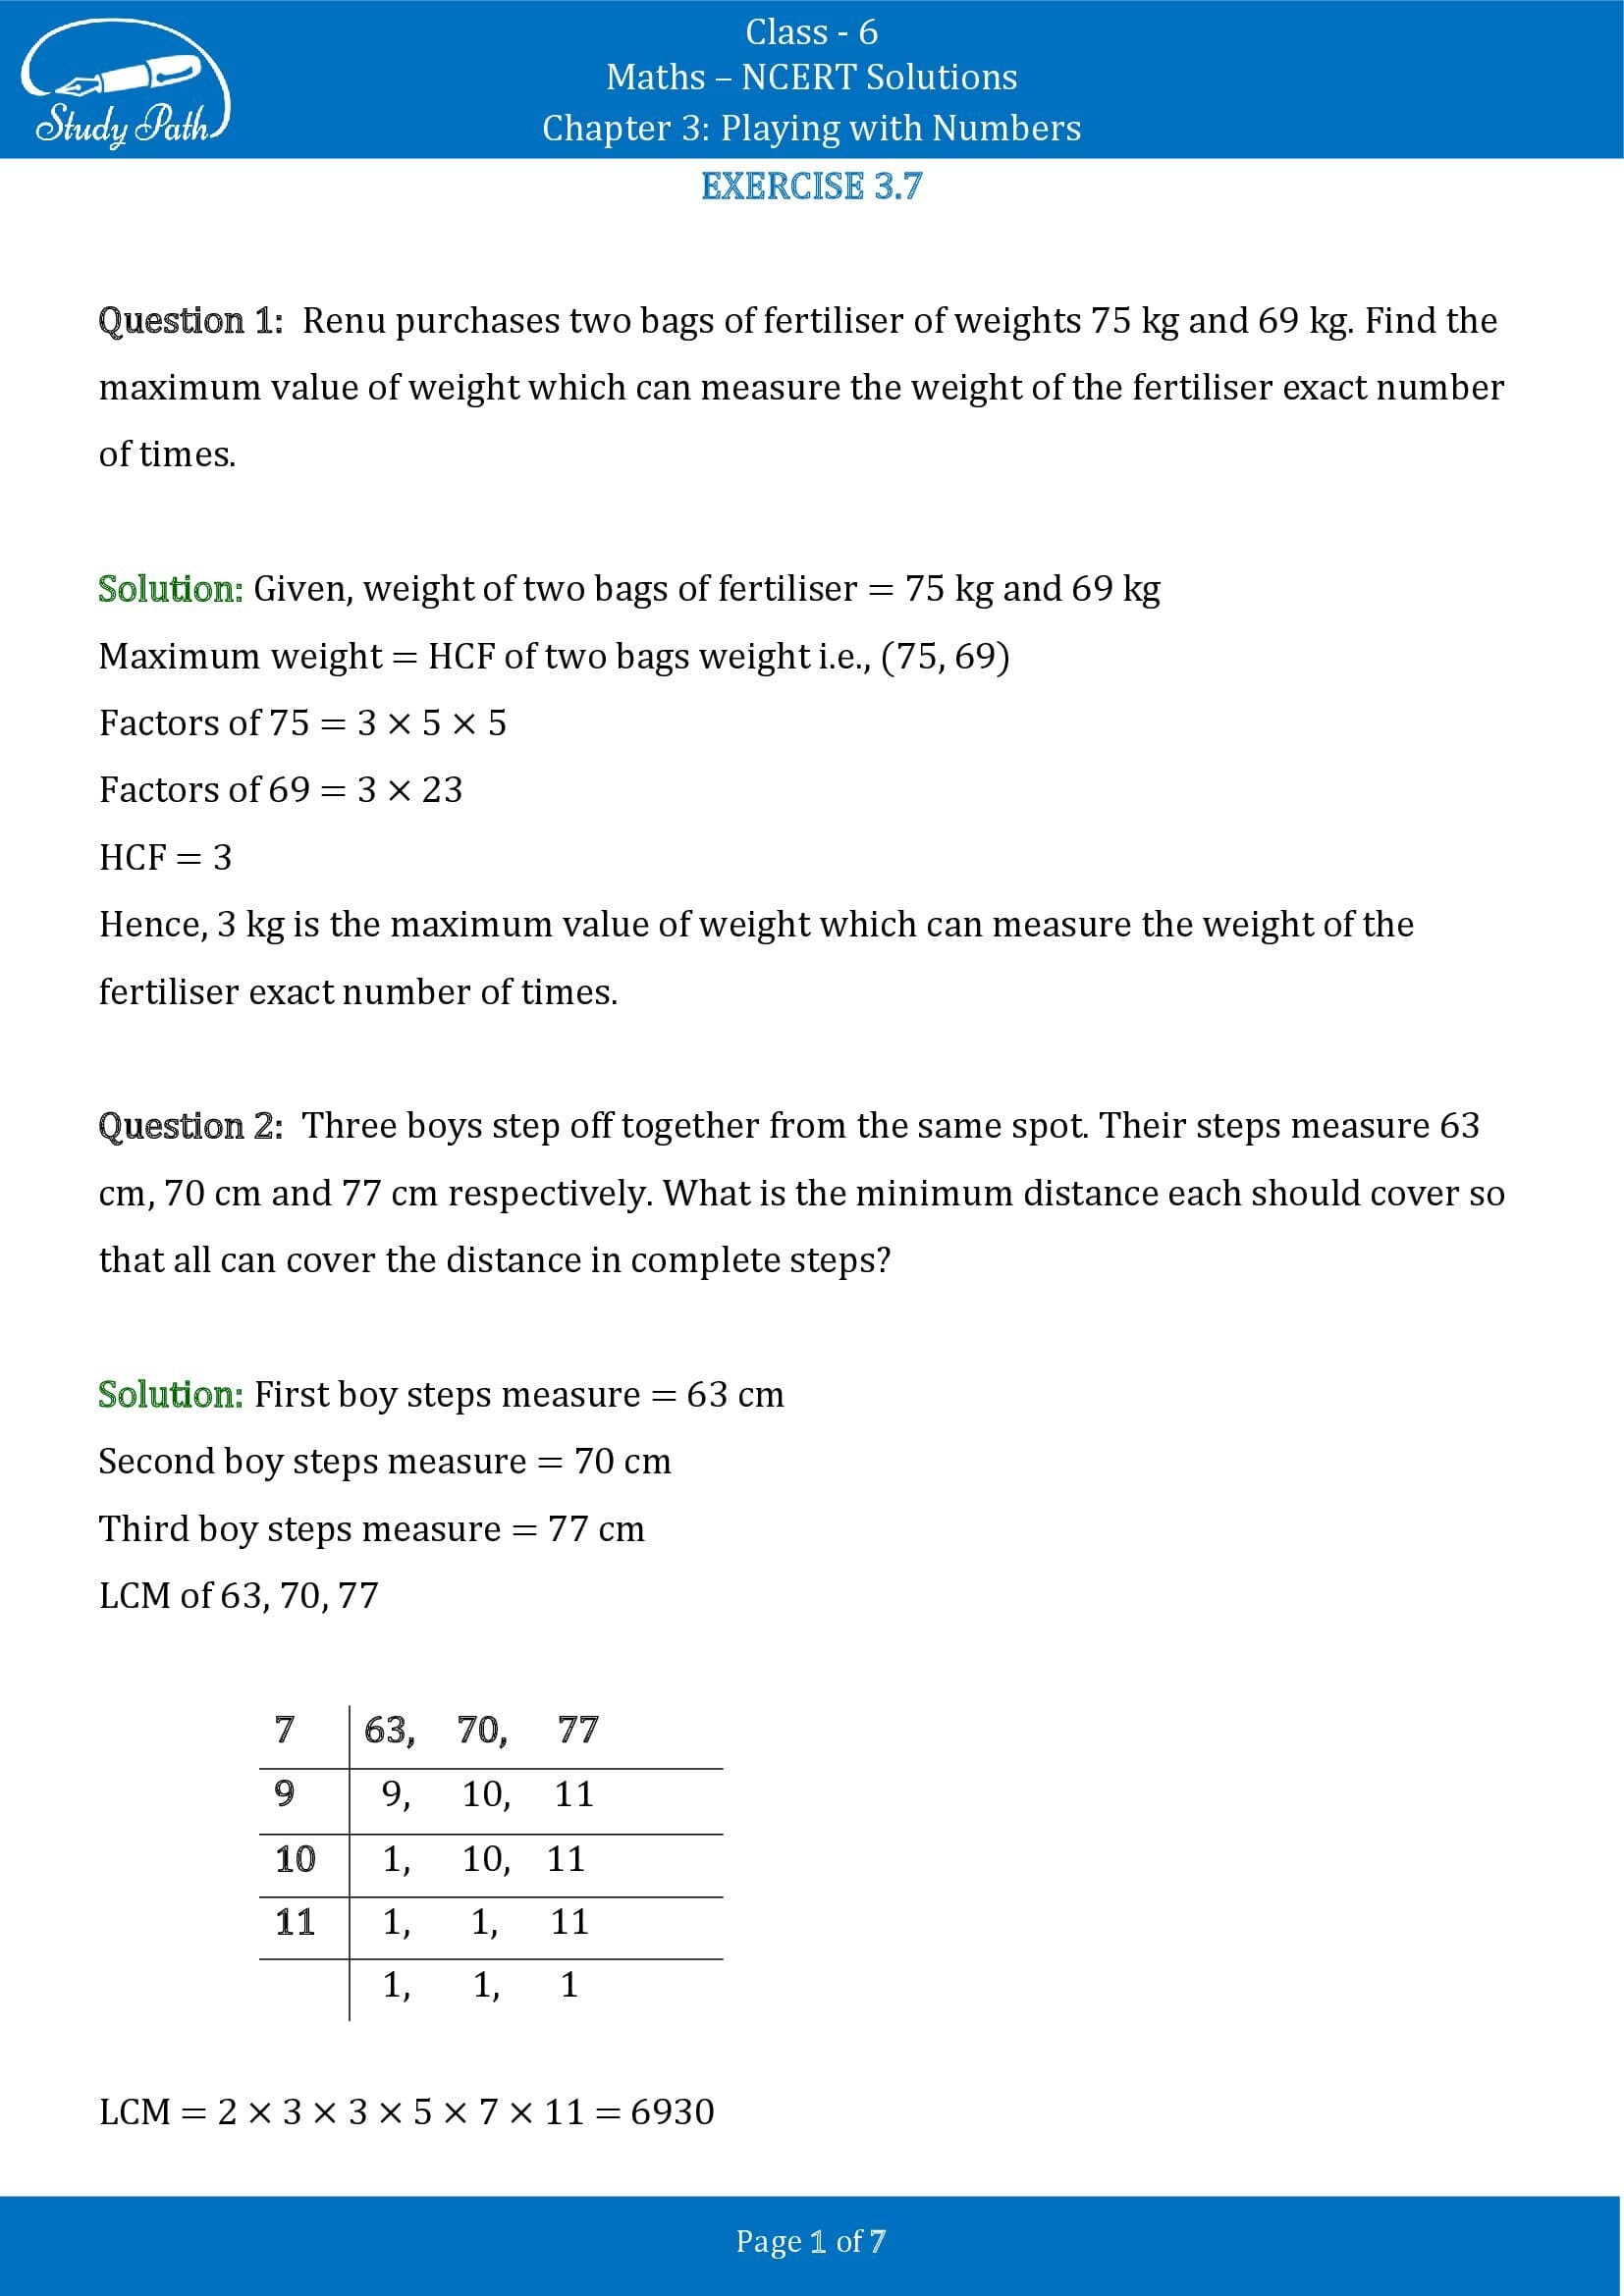 NCERT Solutions for Class 6 Maths Chapter 3 Playing with Numbers Exercise 3.7 00001